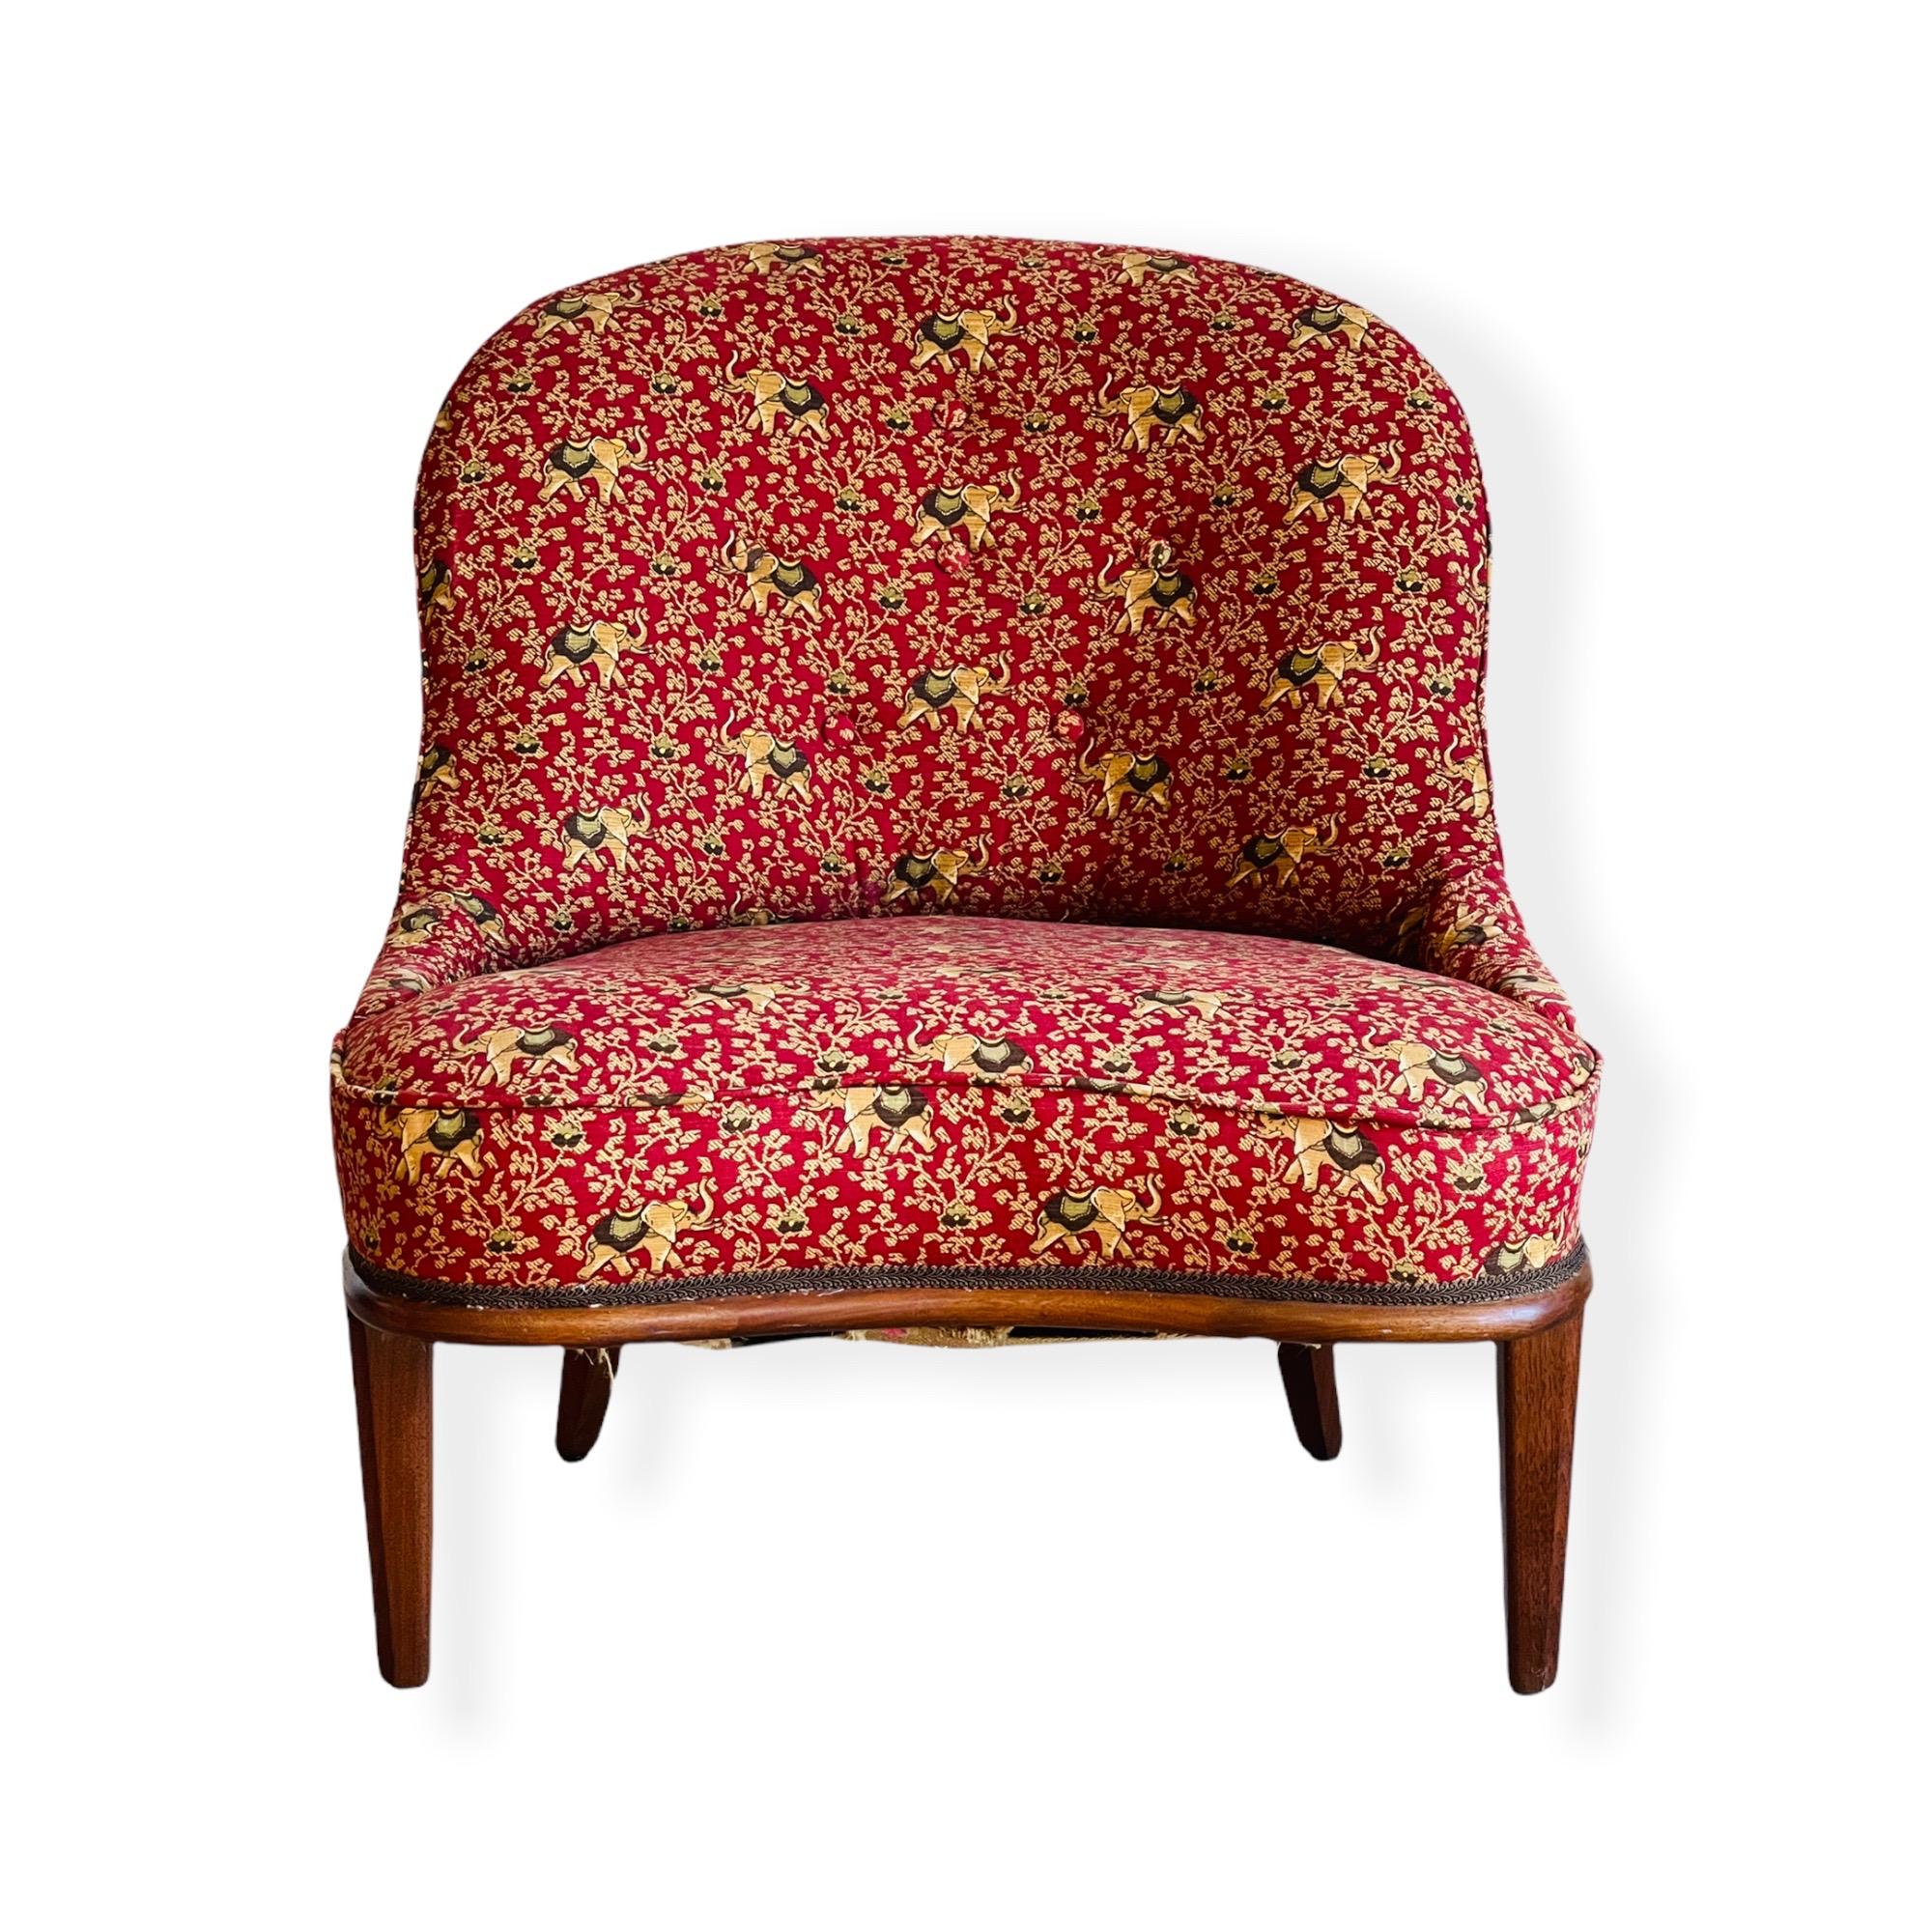 This amazing Edward Wormley Style Slipper chair is a show stopper. Solid mahogany frame and legs with original floral and elephant pattern fabric. This chair is in good vintage condition with normal wear consistent with age and use. 

Measures: W